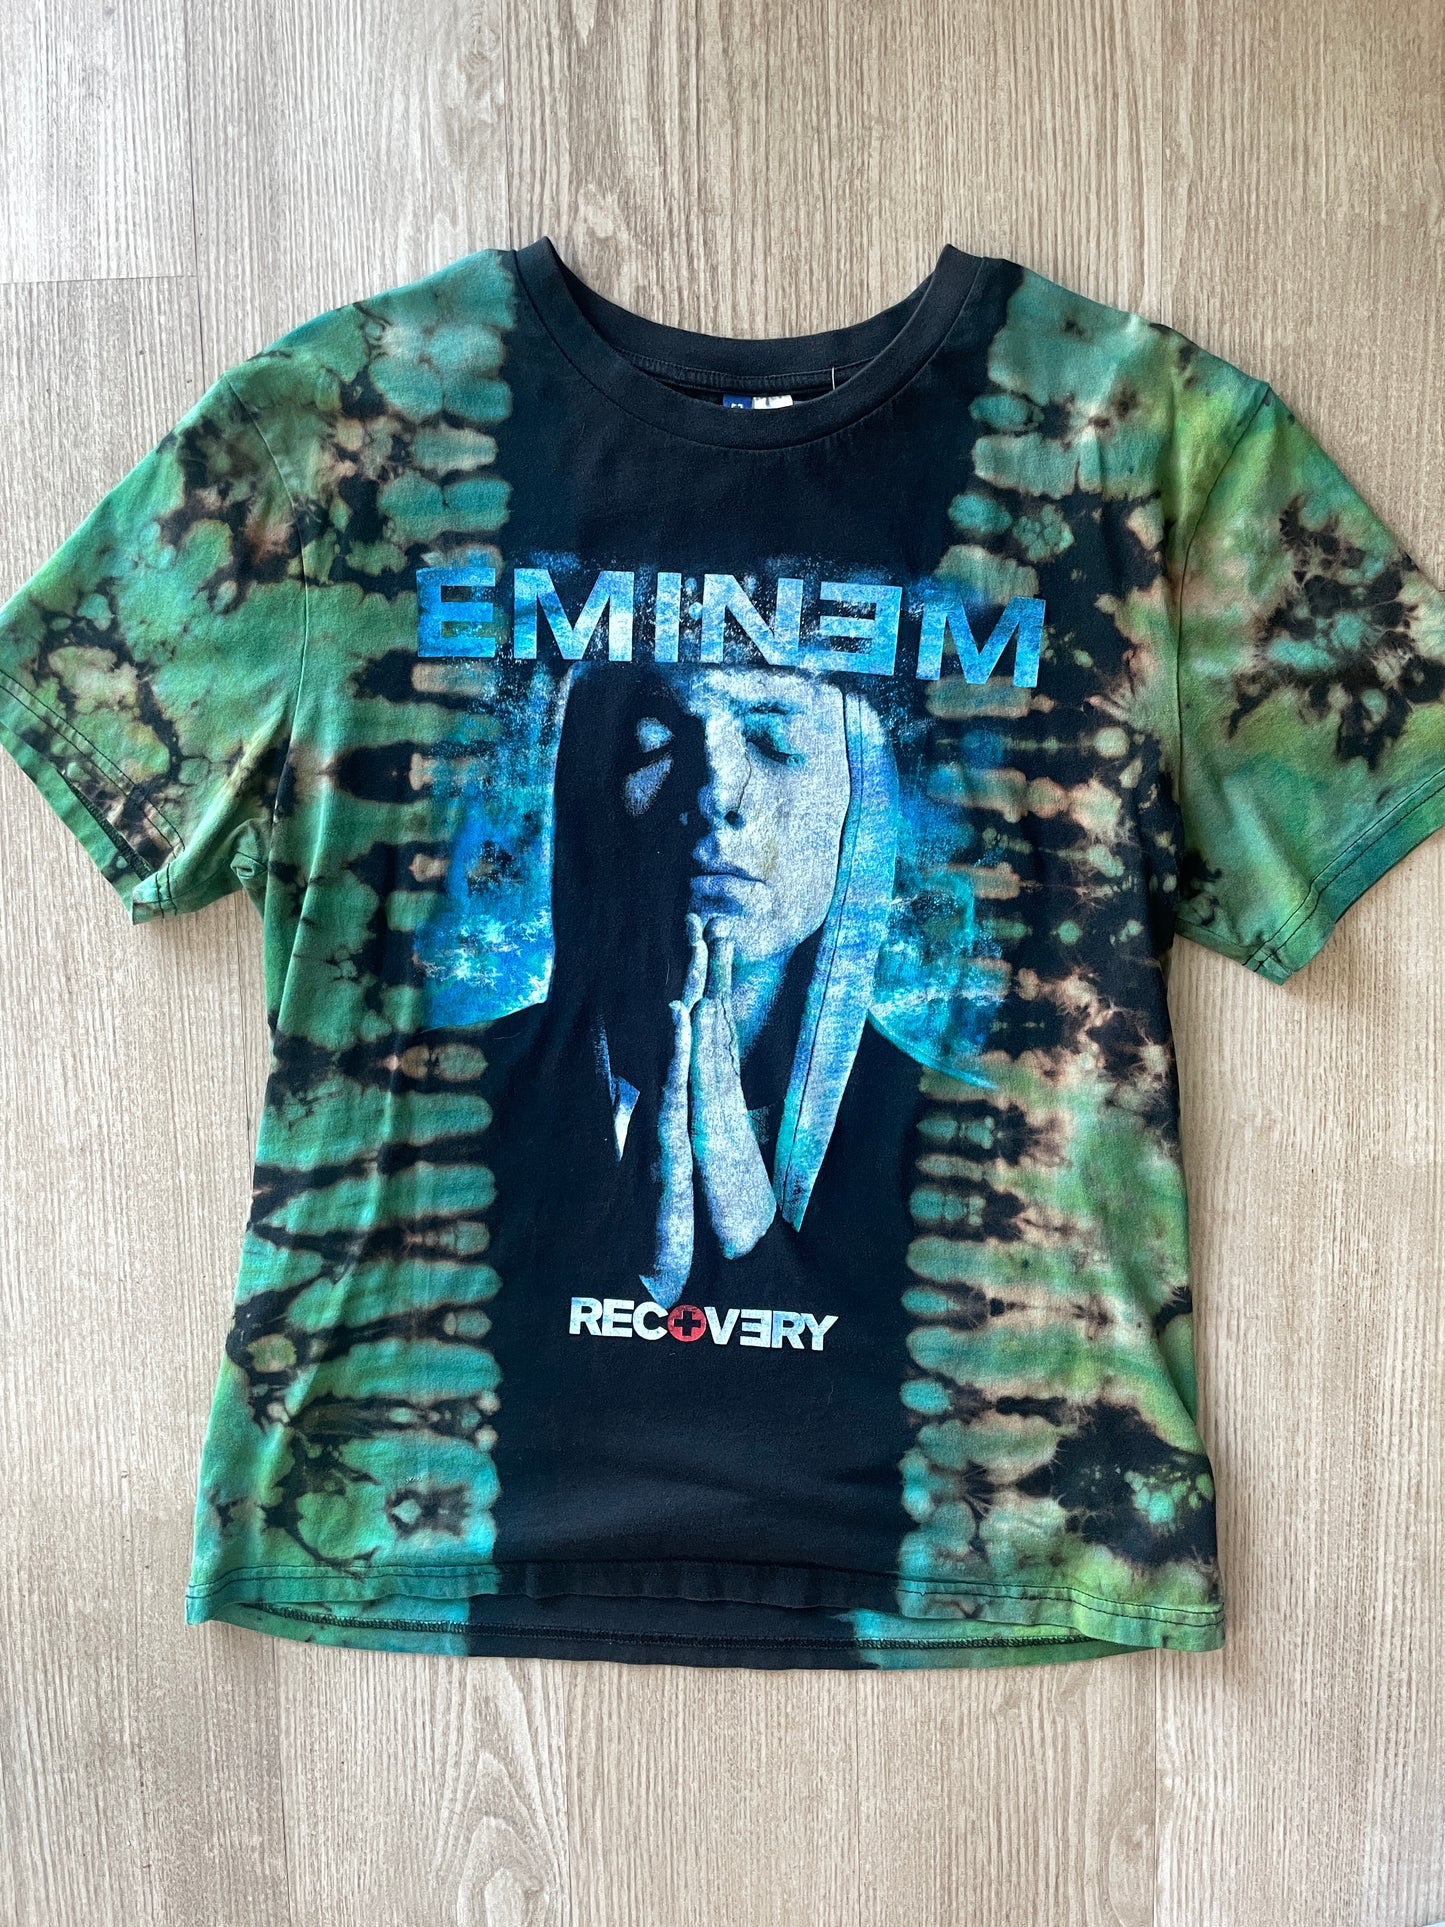 MEDIUM Men’s Eminem Recovery Handmade Bleach Tie Dye Short Sleeve T-Shirt | One-Of-a-Kind Upcycled Black and Blue Pleated Top